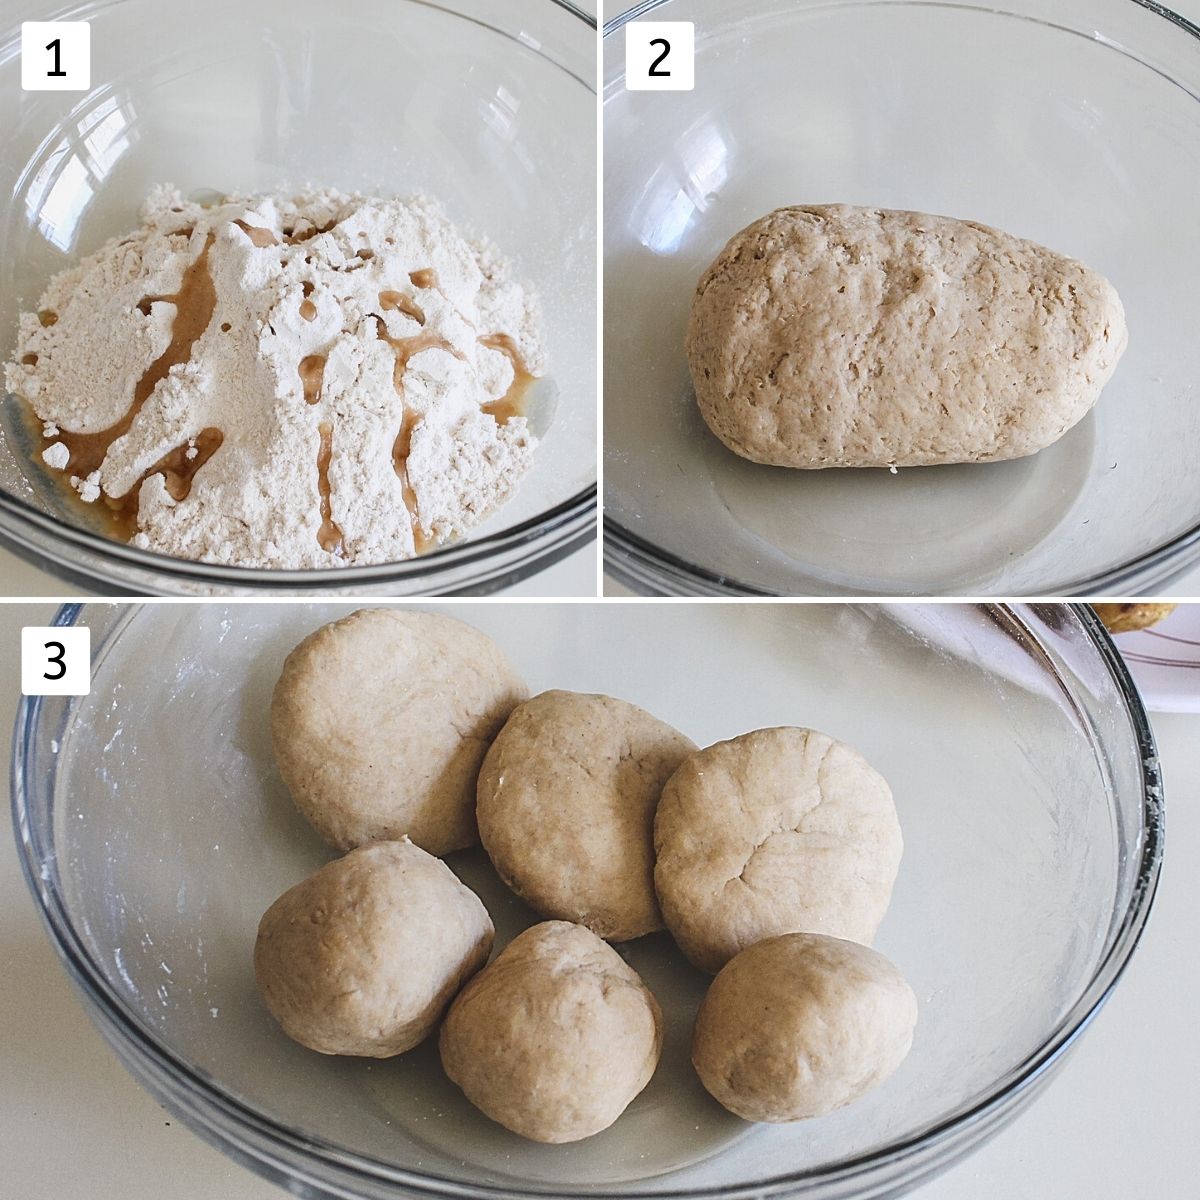 Collage of 3 images making dough. Shows flour, oil in a bowl, mixing and kneading the dough, making 6 dough balls